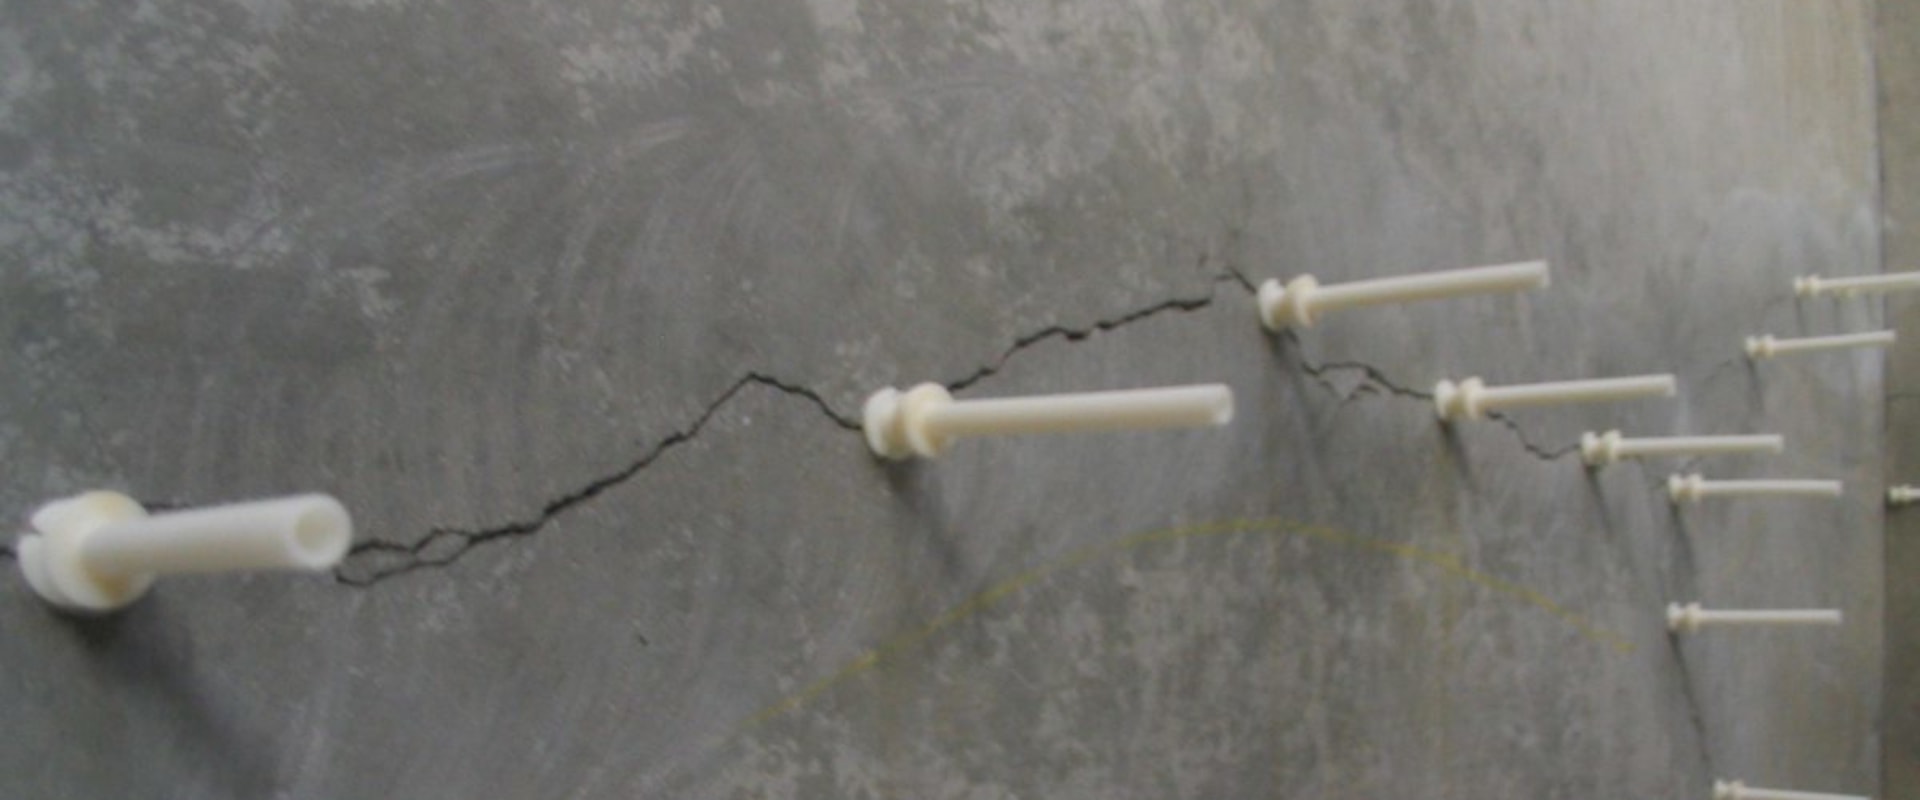 Where to Buy Polyurethane Crack Injection? - An Expert's Guide